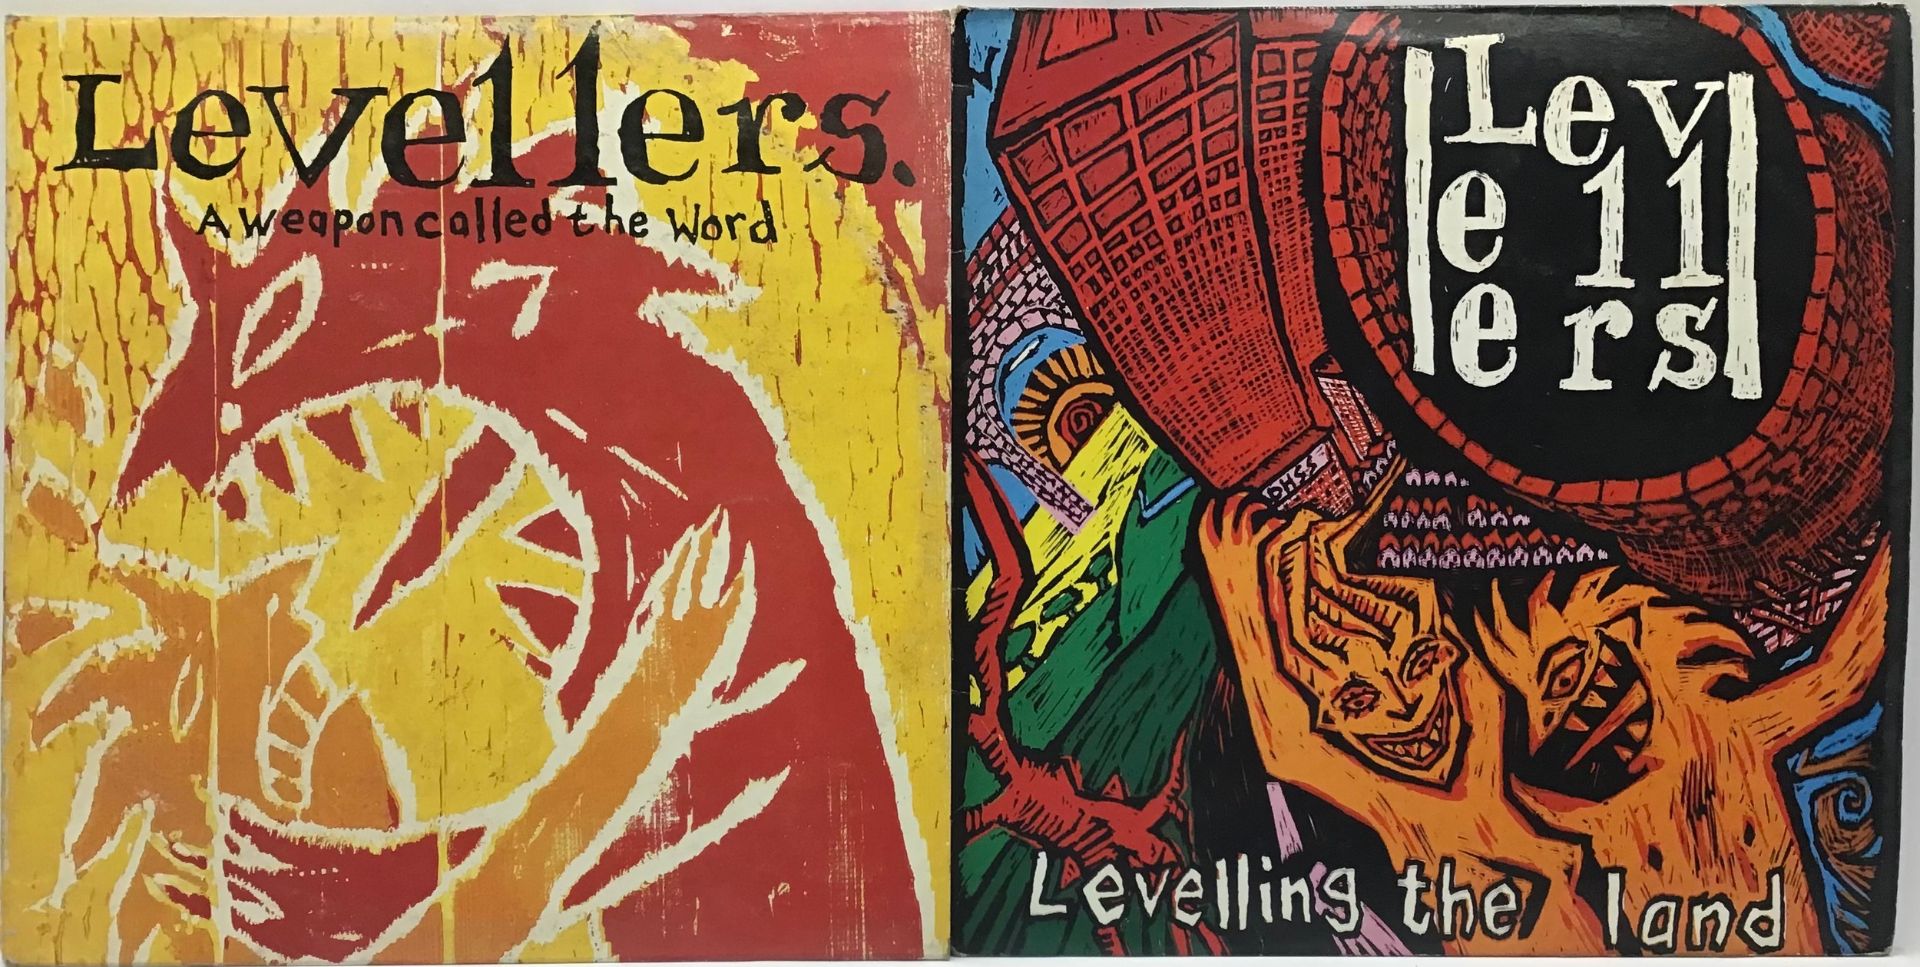 2 VINYL LP RECORDS FROM THE LEVELLERS. Titles include - A Weapon Called The World and Levelling